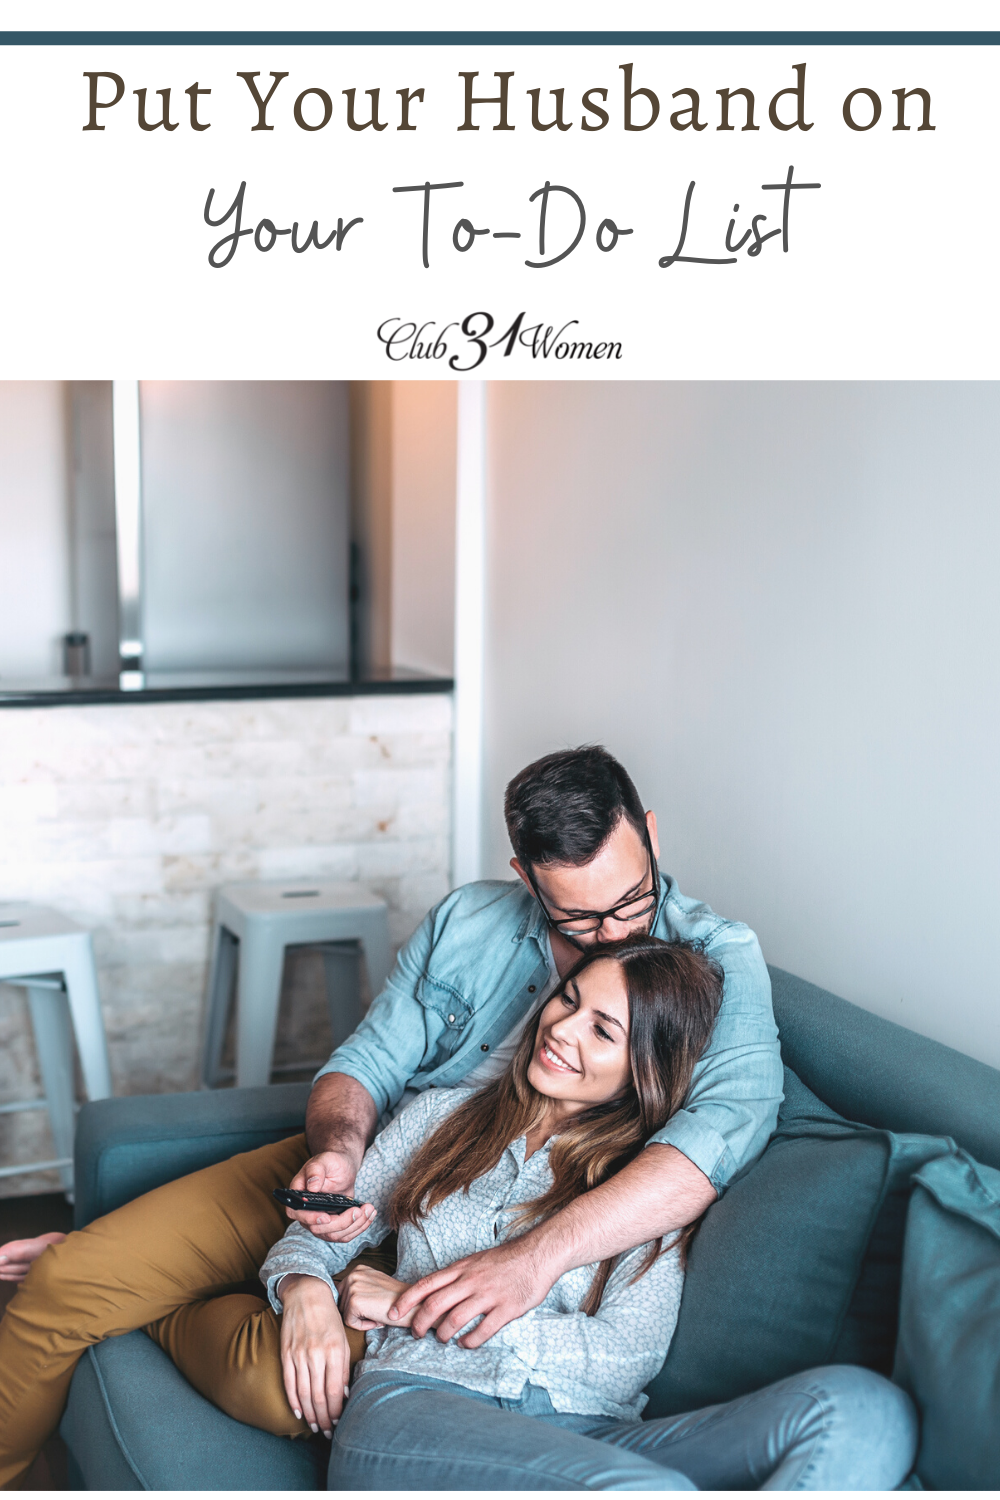 When you make your husband a priority by adding him into your "schedule" and onto your "to-do lists", you make him feel cared for. via @Club31Women